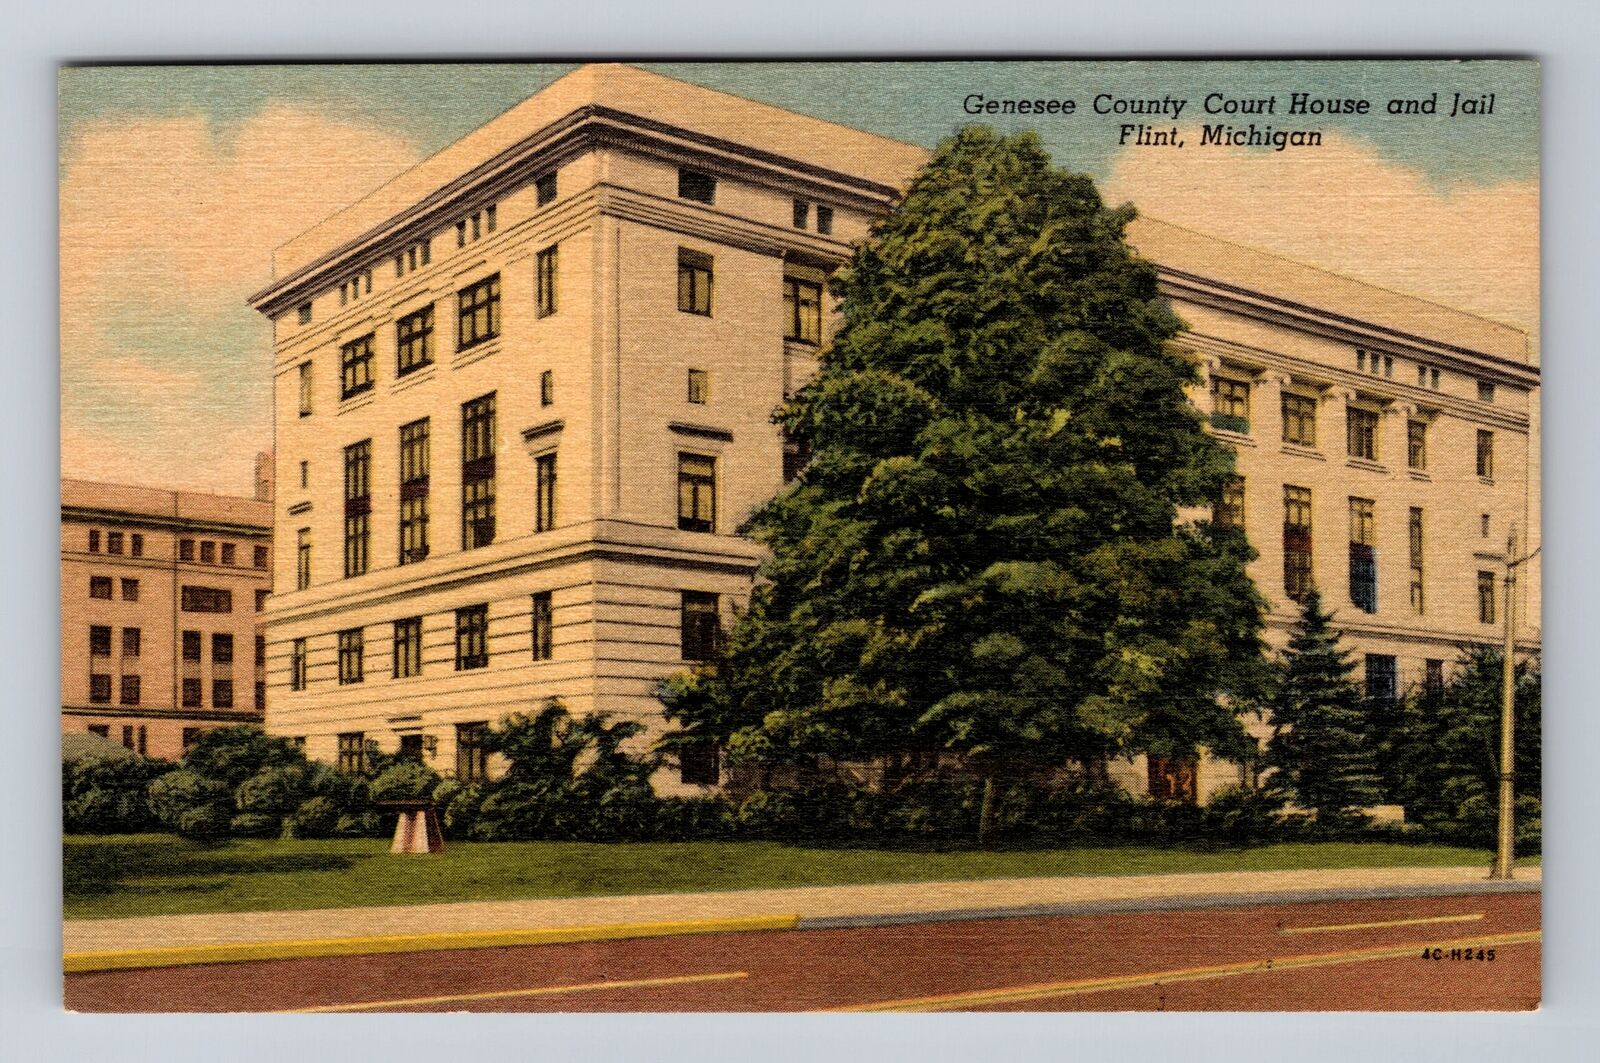 Flint MI-Michigan, Genesee County Court House and Jail Vintage Postcard